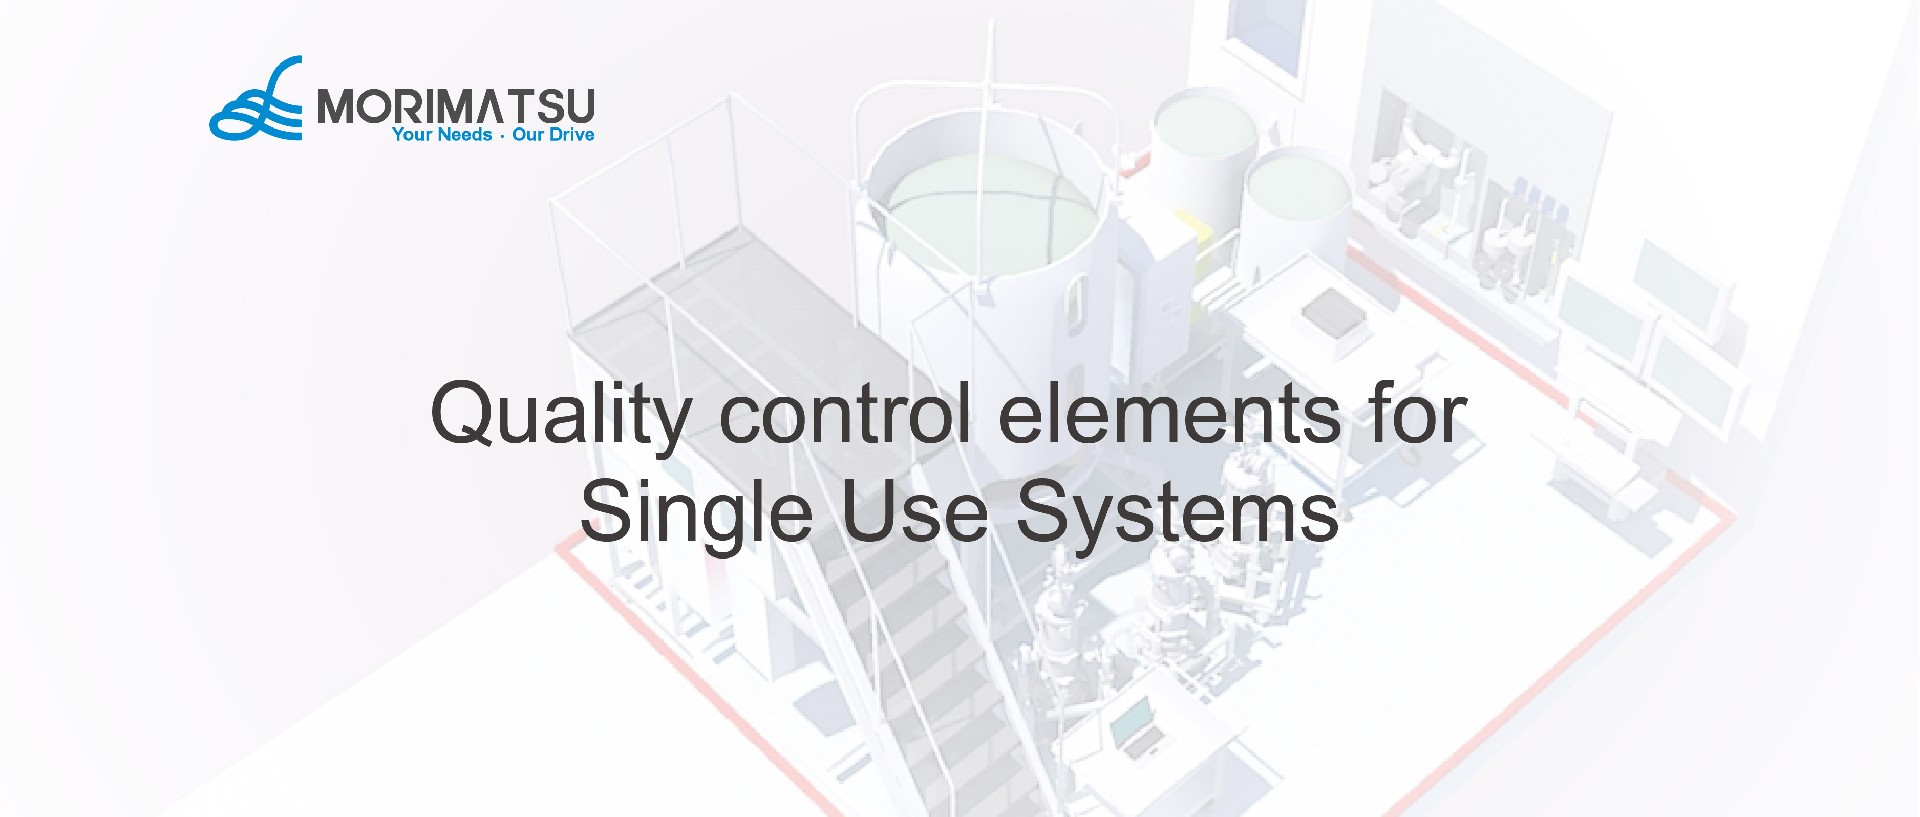 Morimatsu | Quality control elements for Single Use Systems